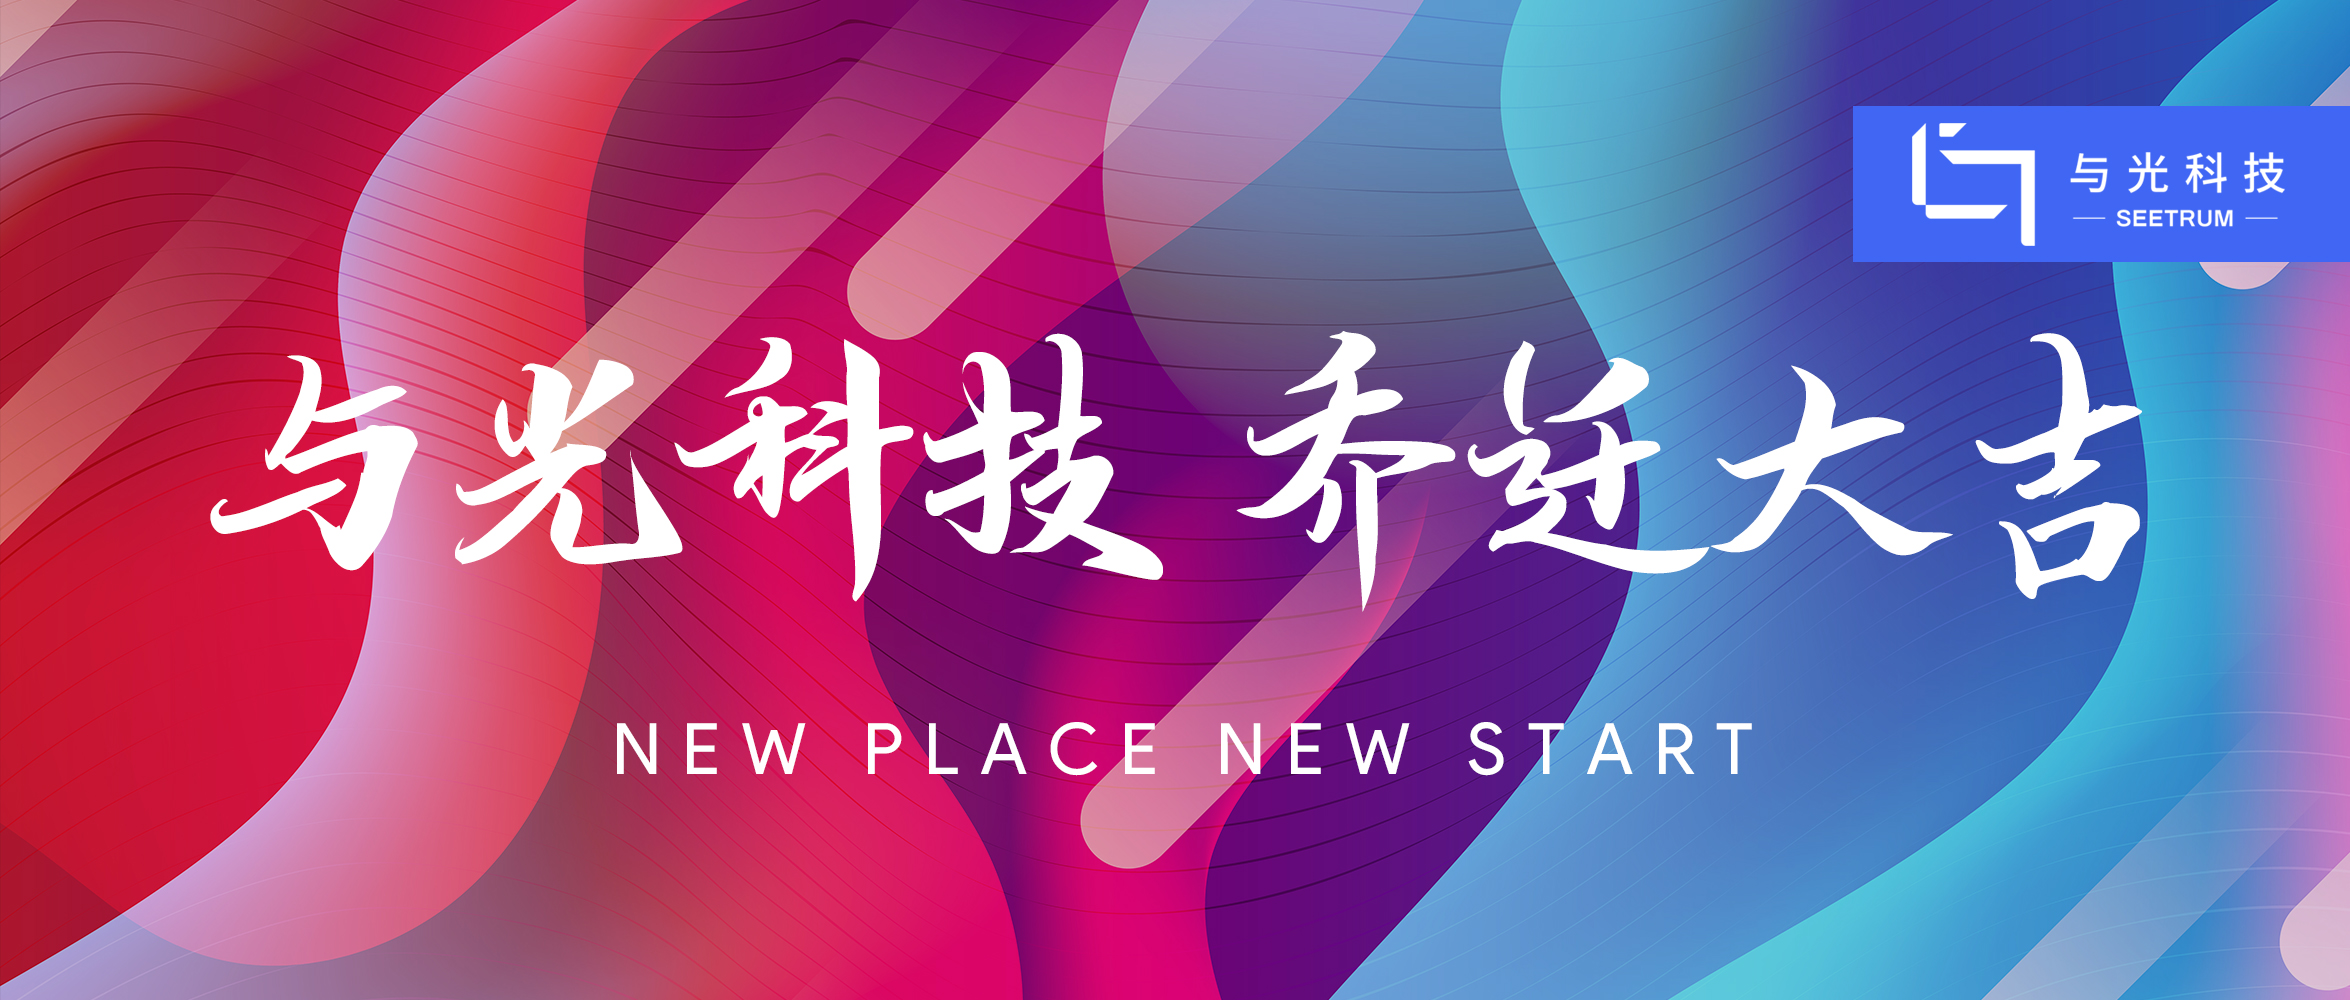 NEW PLACE NEW START | SEETRUM is Moving！